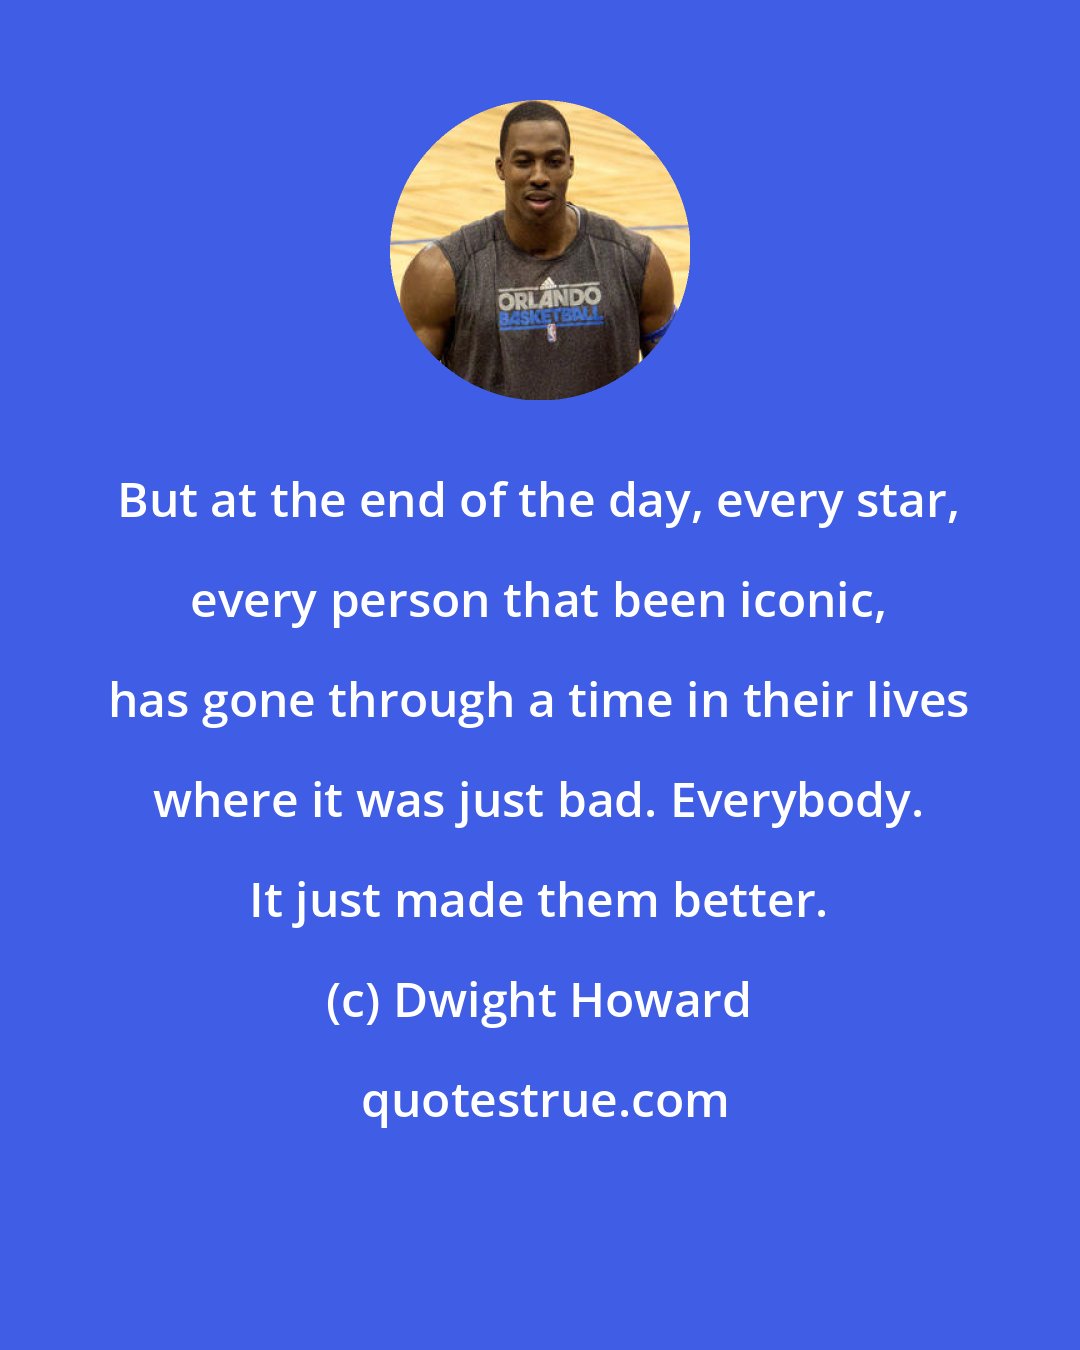 Dwight Howard: But at the end of the day, every star, every person that been iconic, has gone through a time in their lives where it was just bad. Everybody. It just made them better.